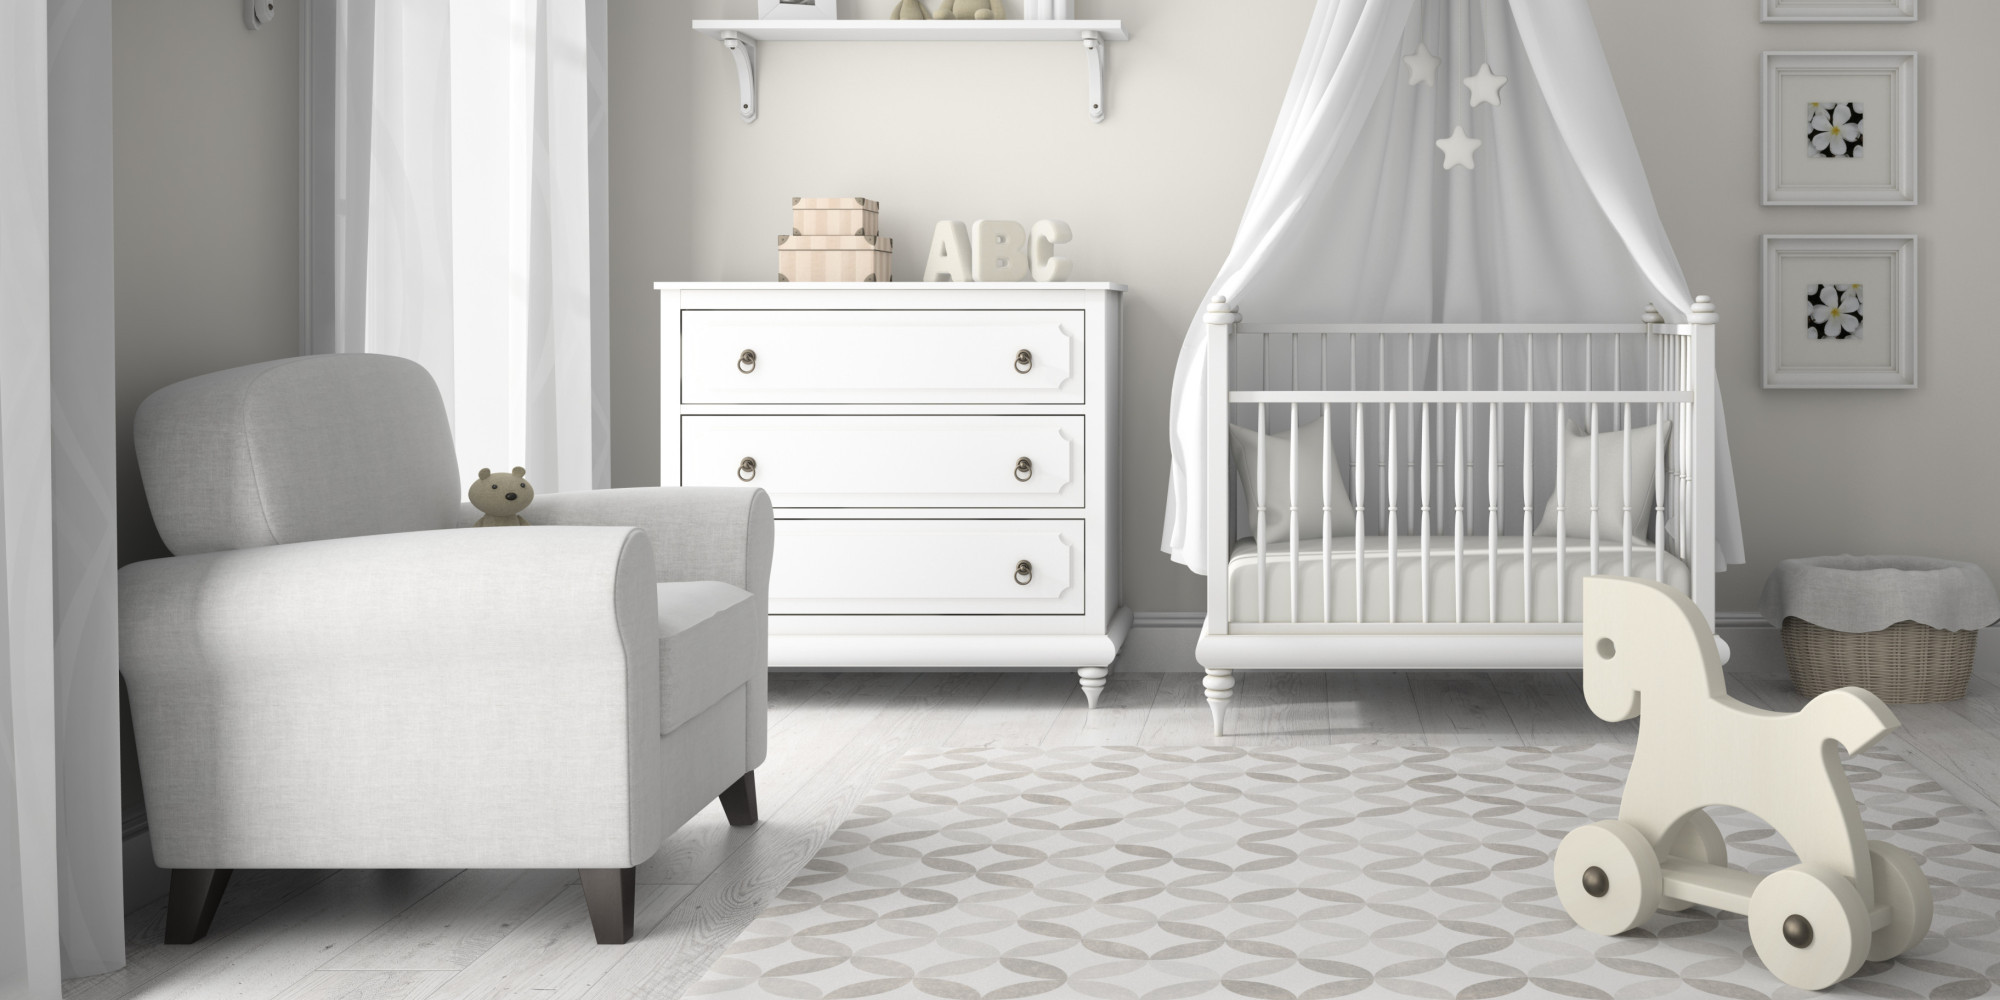 Room Decoration For Baby
 How To Decorate Your Baby s Nursery In A Day